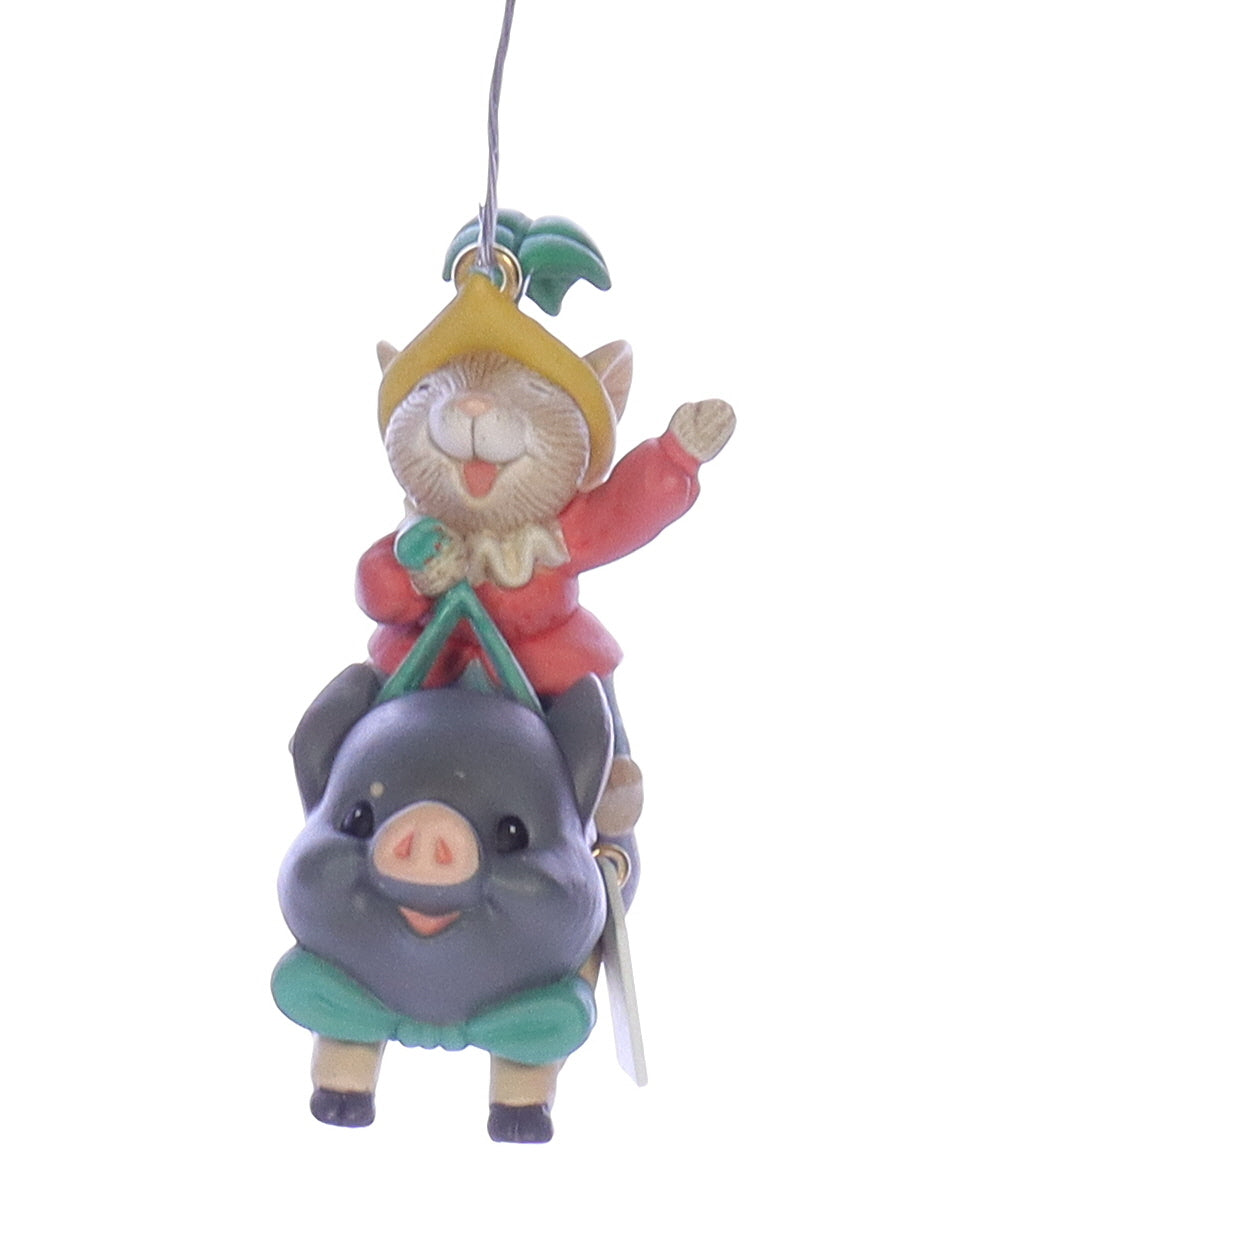 Enesco_Treasury_of_Christmas_Ornaments_575690_Tom_Tom_the_Pipers_Son_Christmas_Ornament_1992 Right View